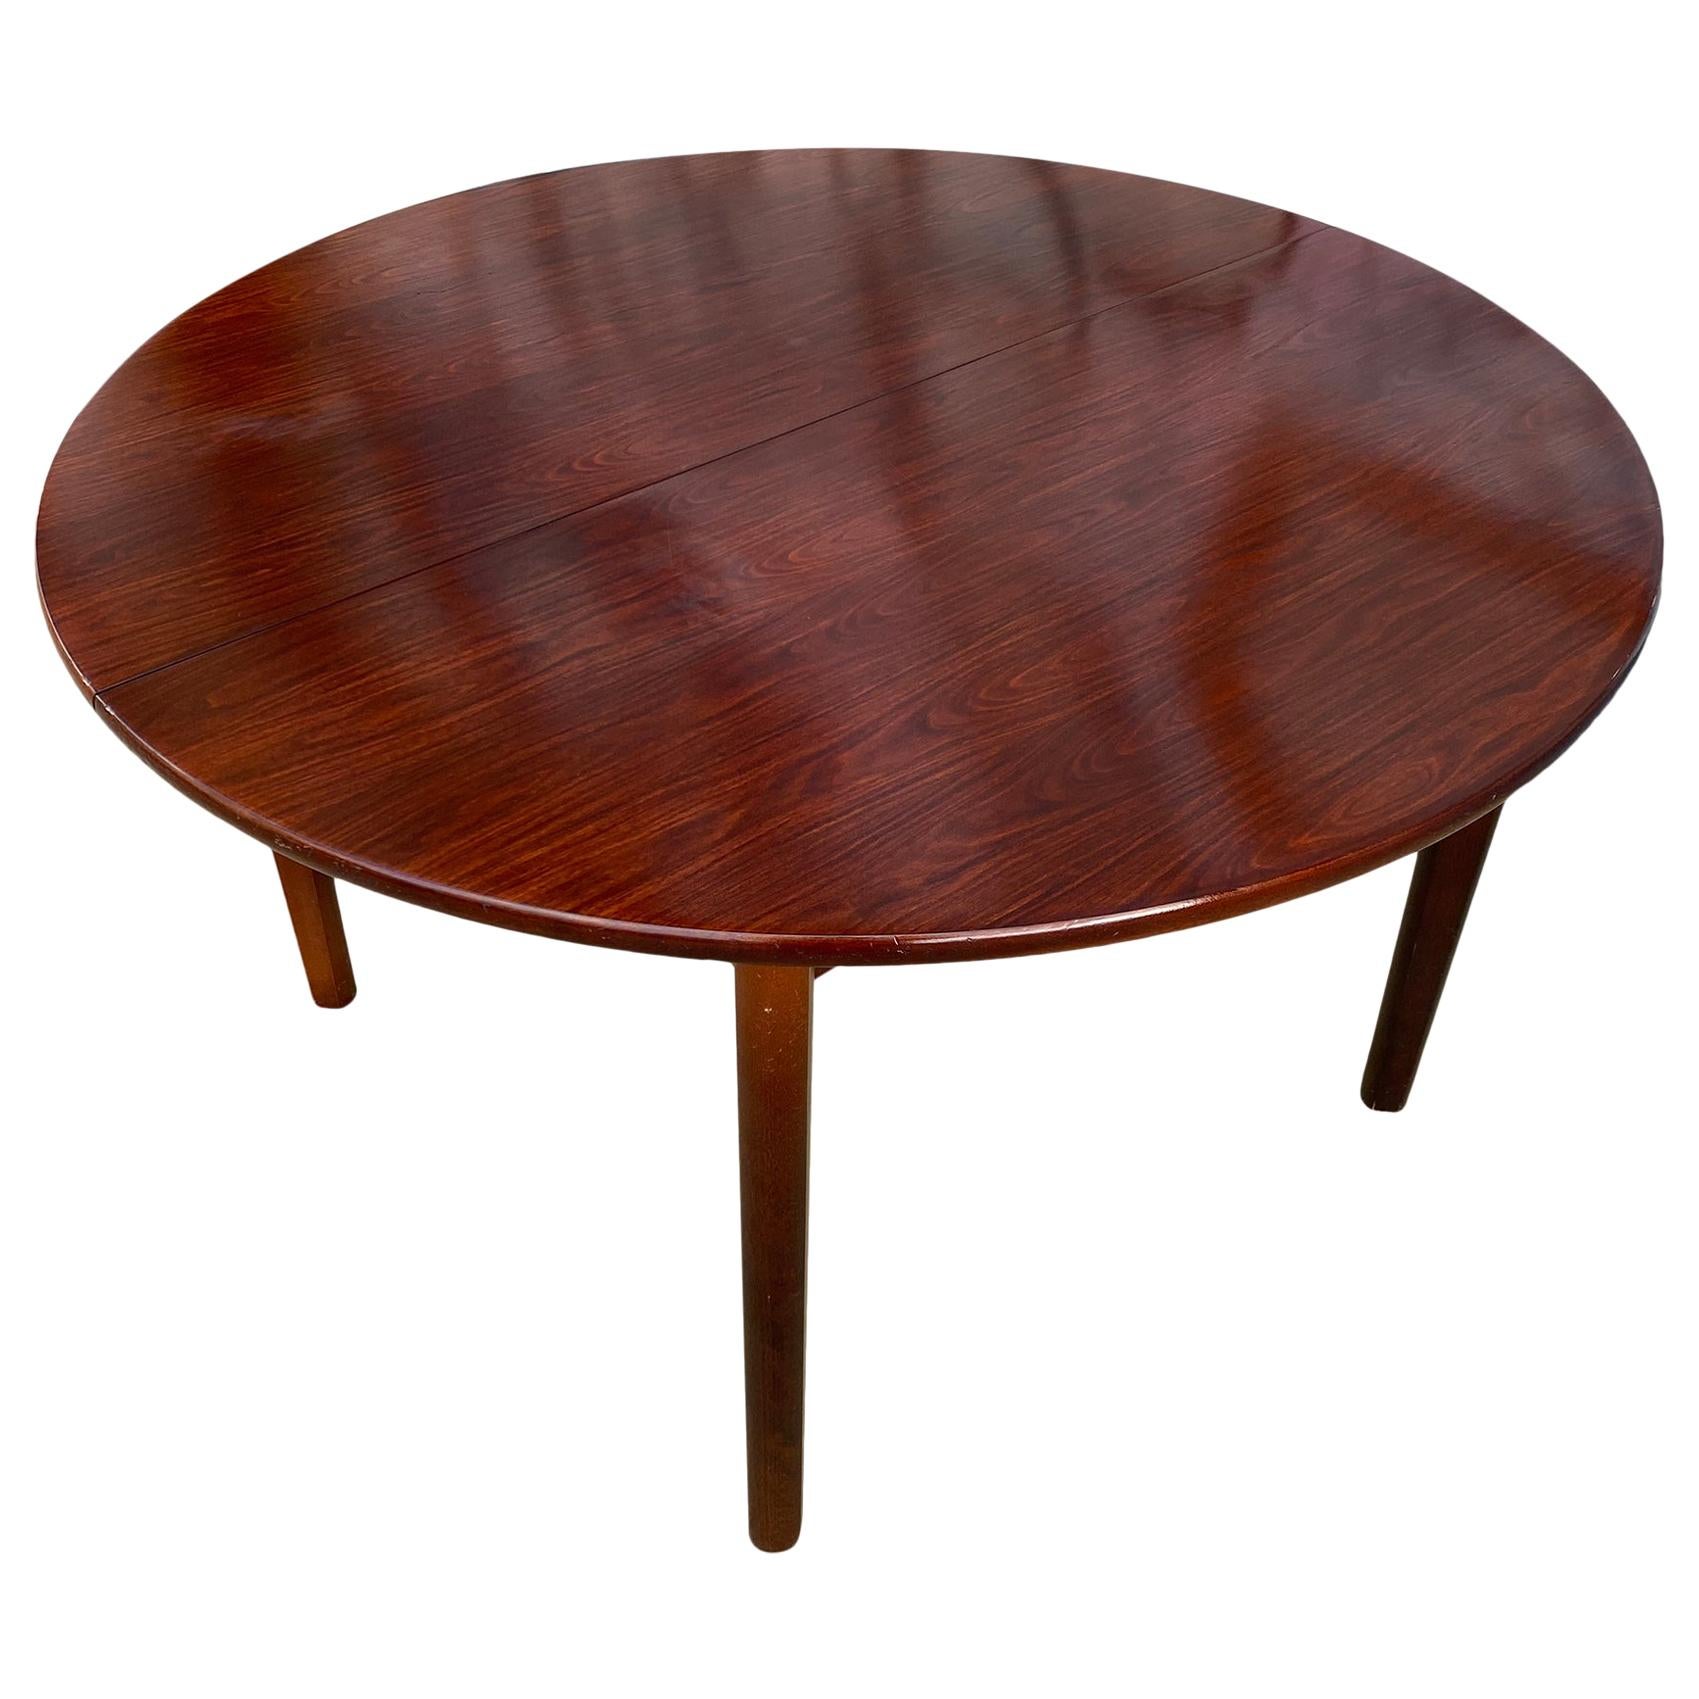 Midcentury Rosewood Expandable Round Dining Table with 1 Nesting Leaf